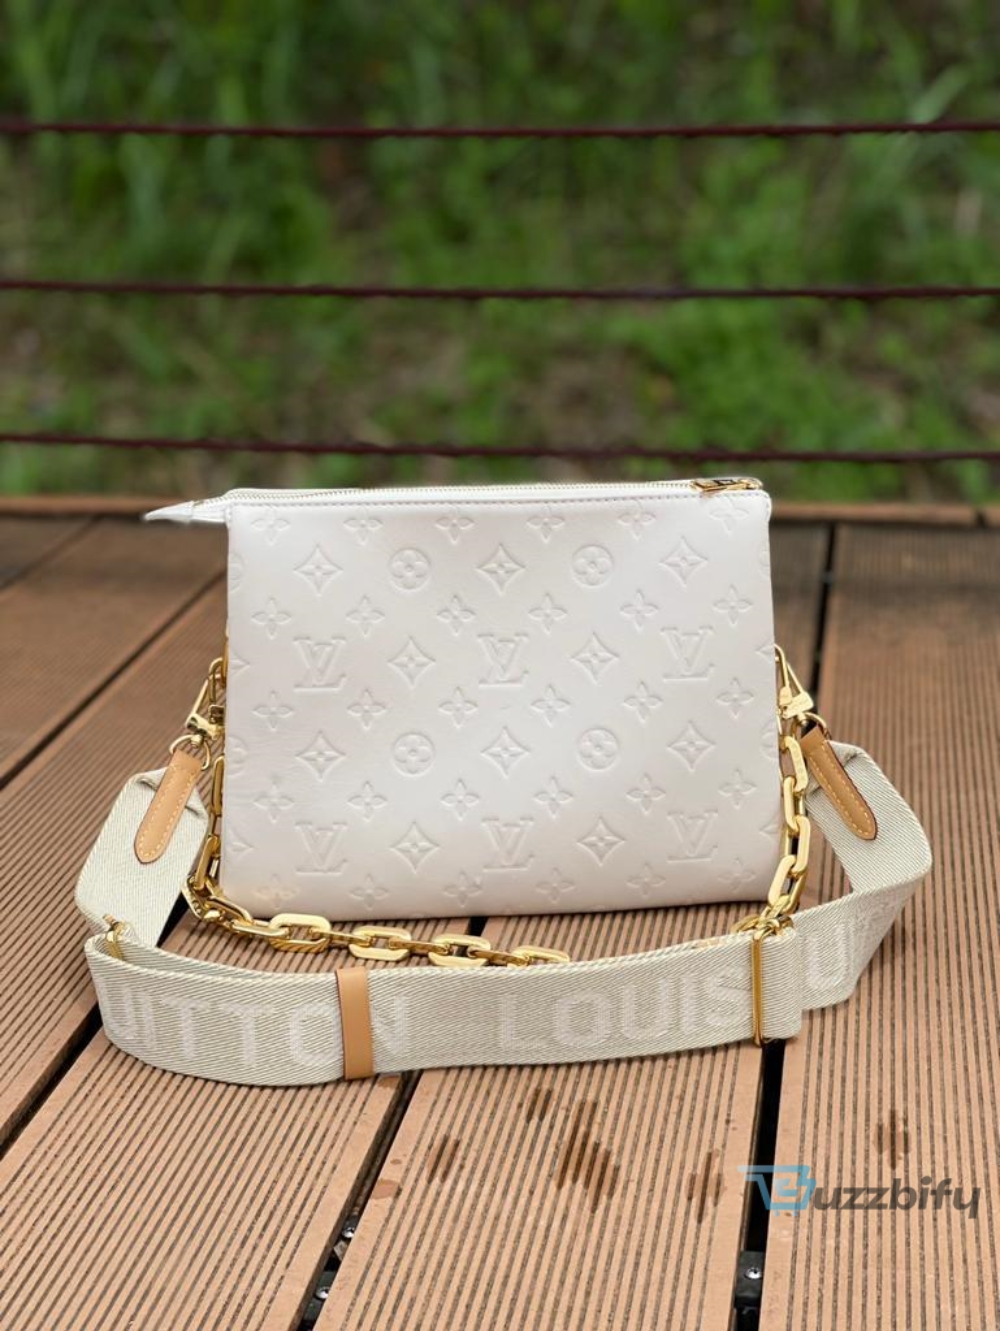 louis vuitton coussin pm monogram embossed puffy white for women womens handbags shoulder and crossbody bags 102in26cm lv m57793 2799 buzzbify 1 28